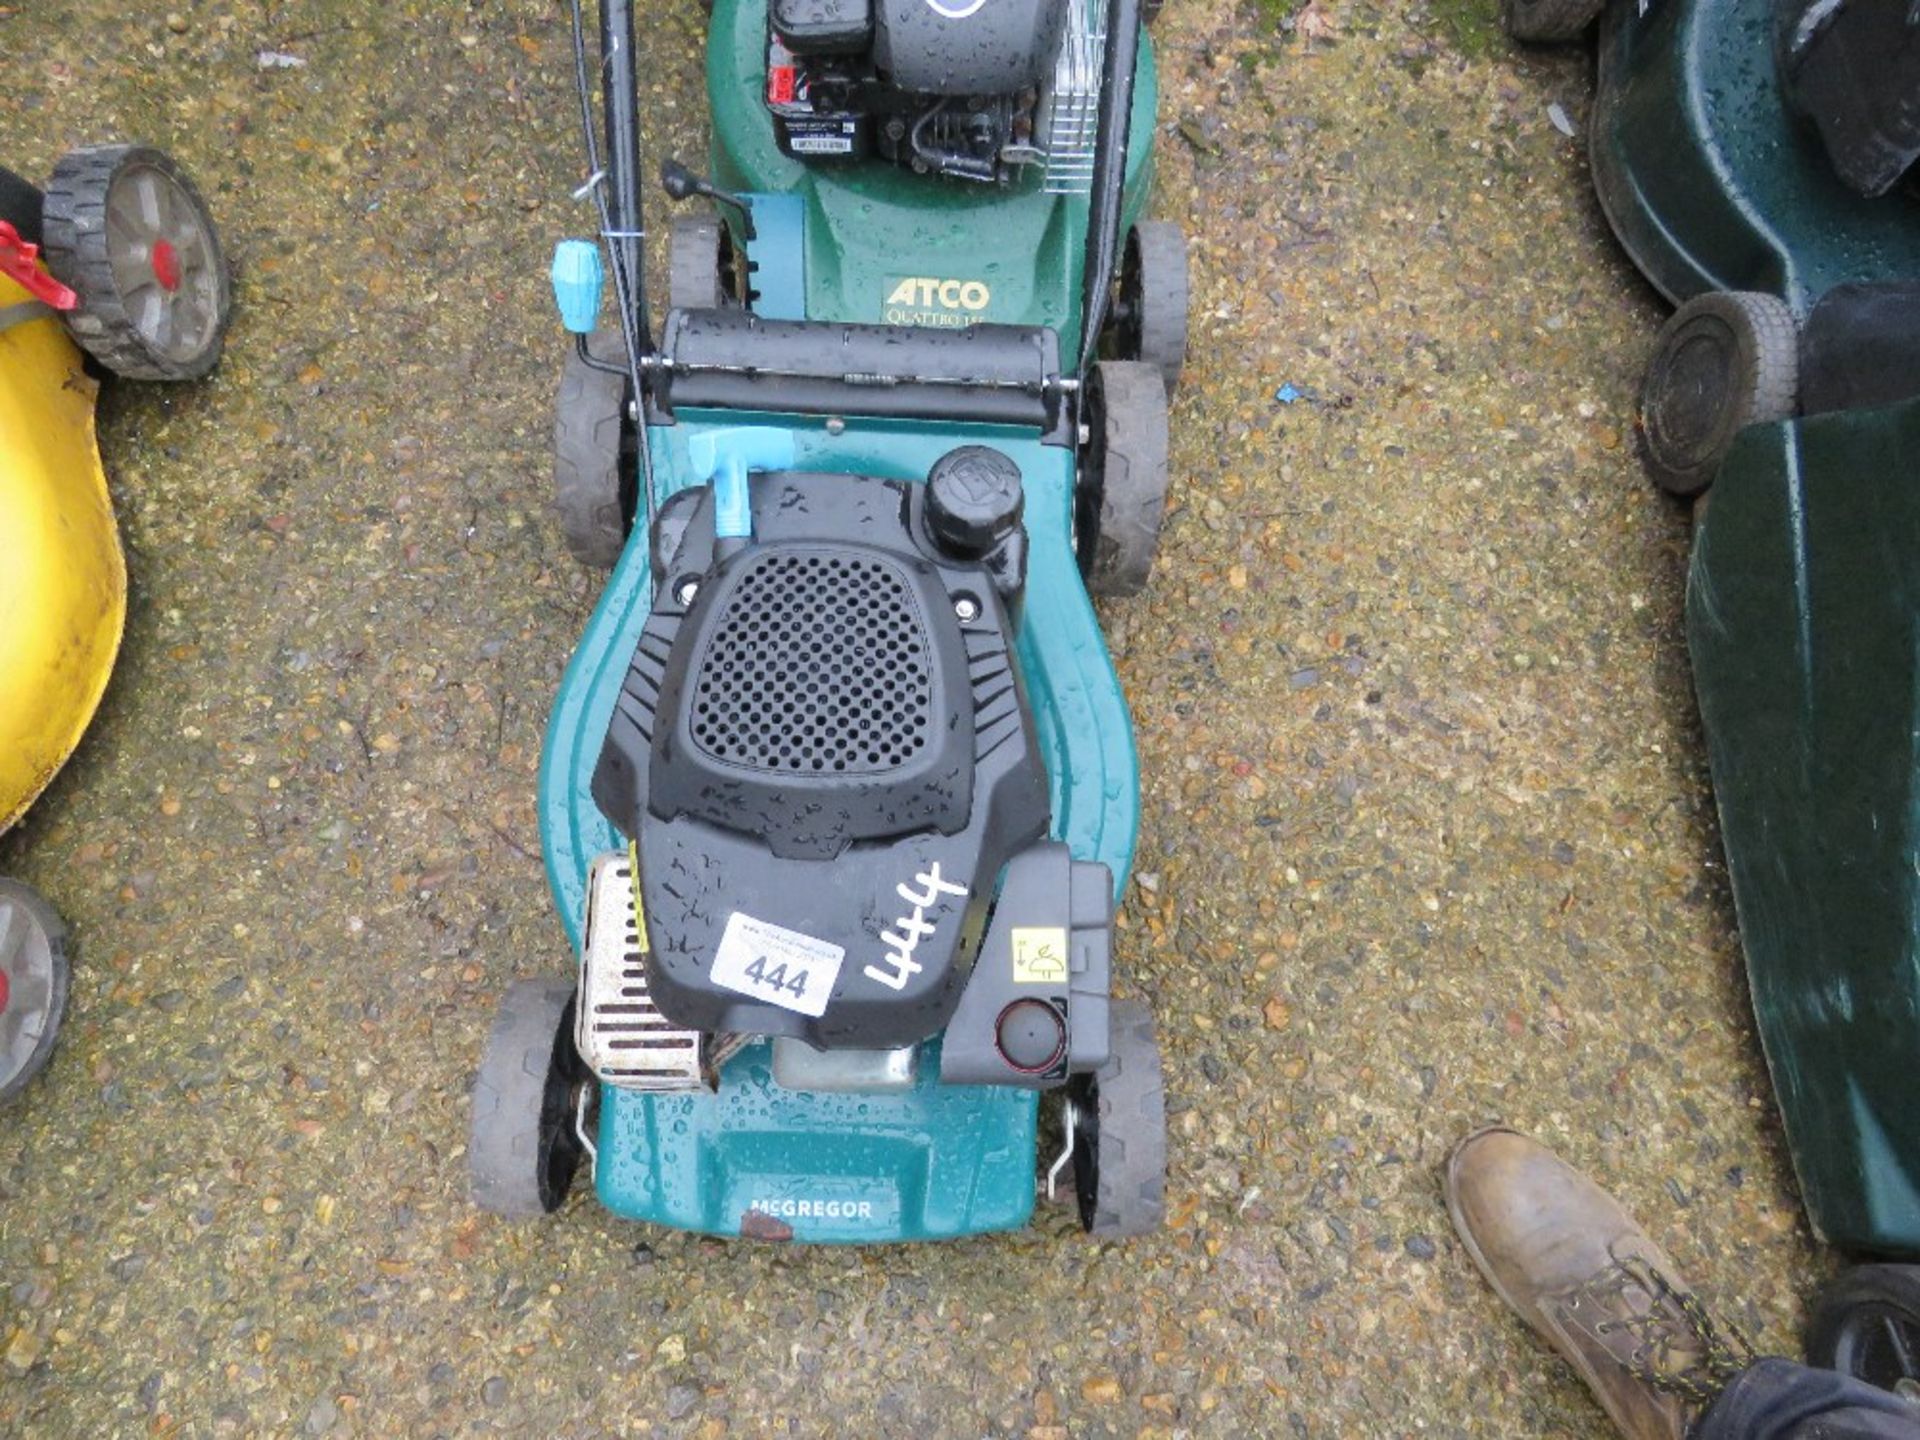 McGREGOR PETROL ENGINED LAWNMOWER, NO COLLECTOR/BAG. THIS LOT IS SOLD UNDER THE AUCTIONEERS MARGI